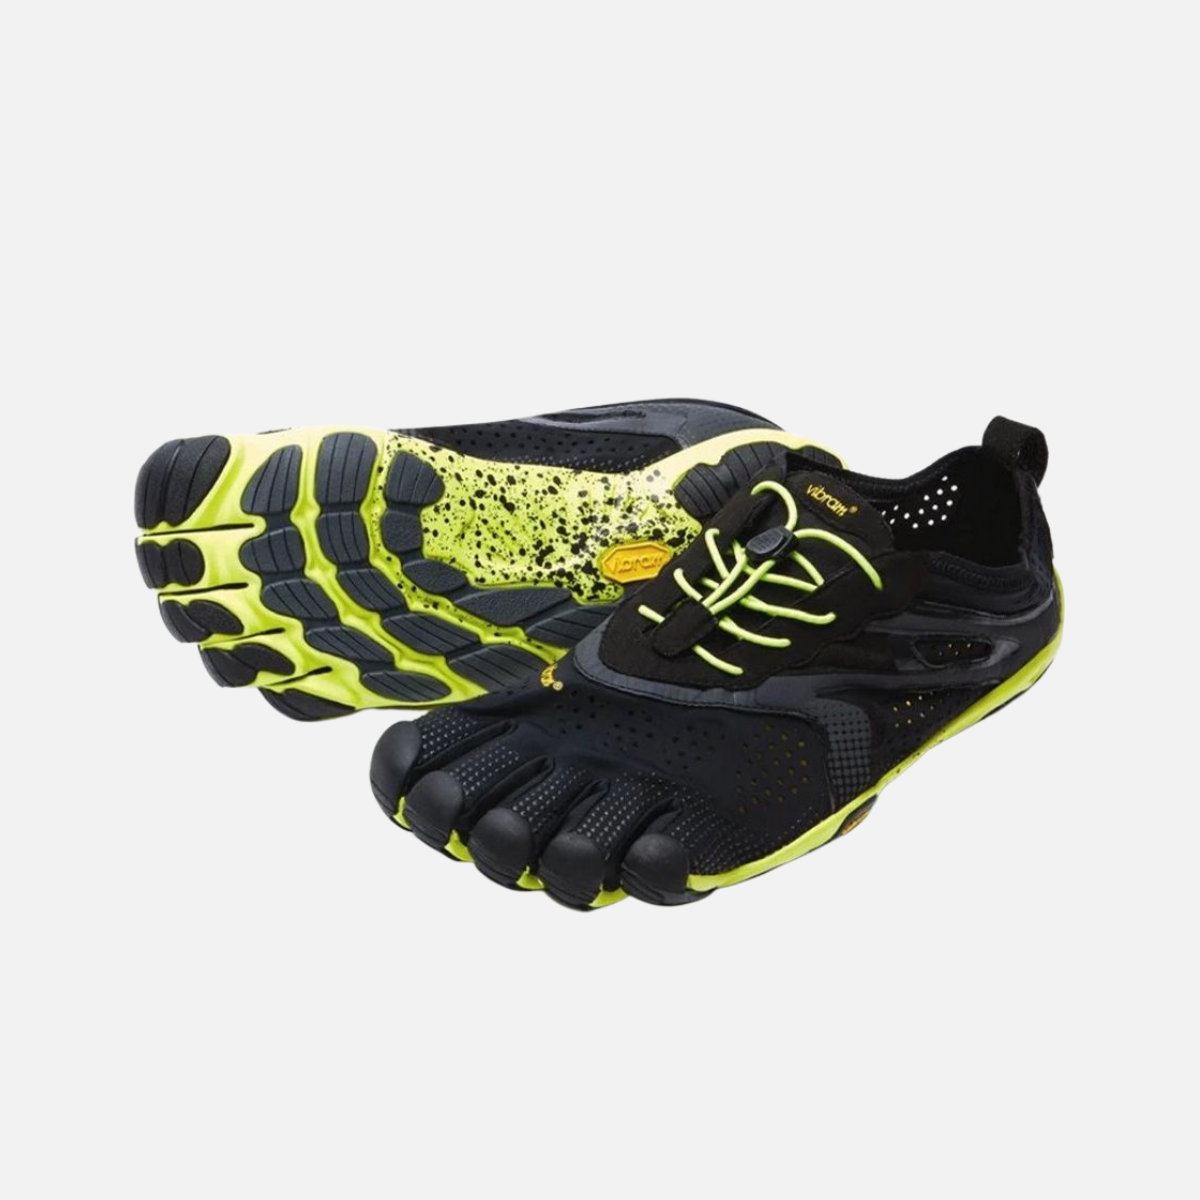 Sizing for Vibram Five Fingers with toe socks. : r/BarefootRunning